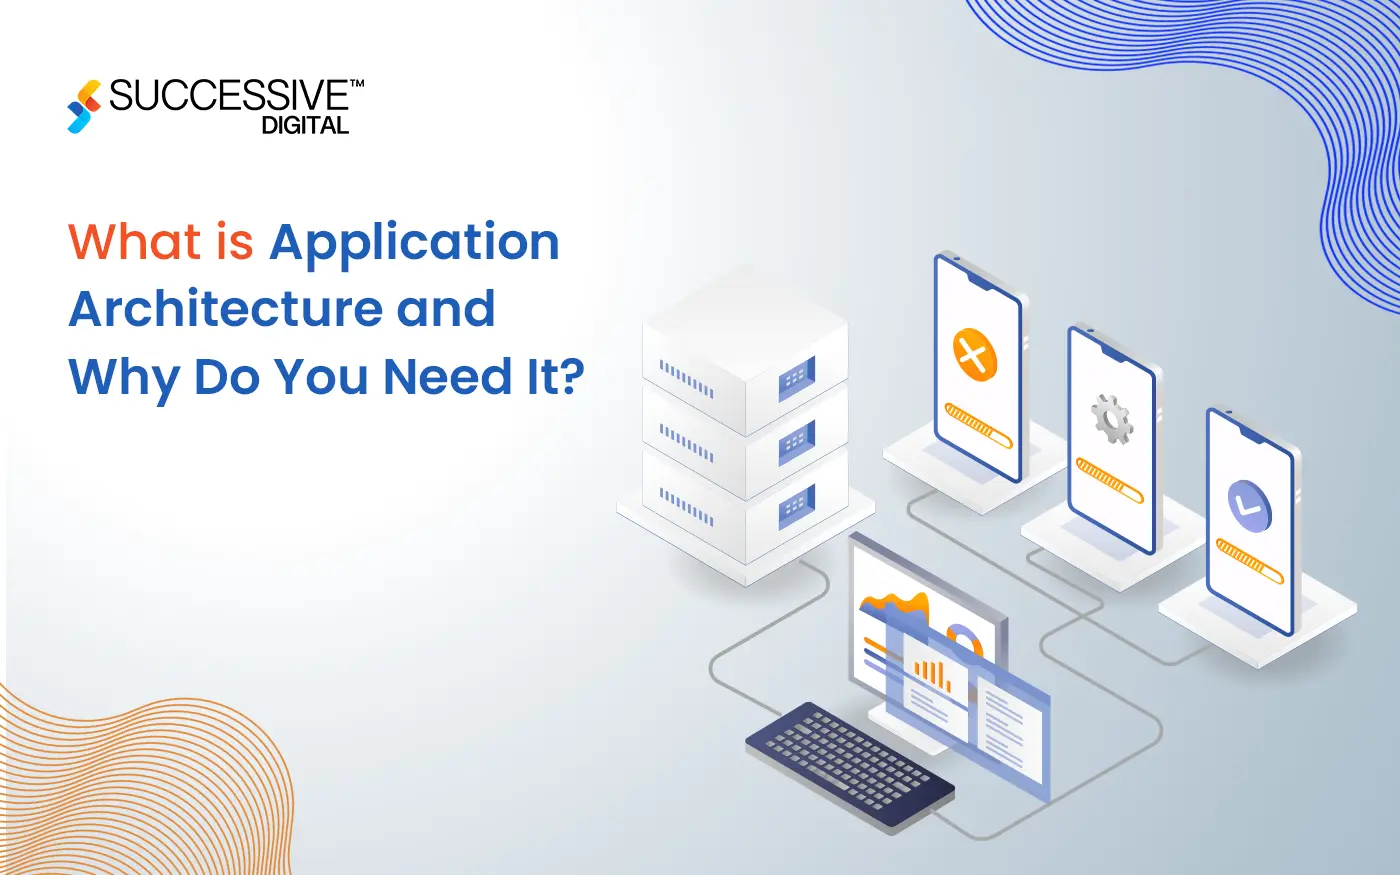 What is Application Architecture and Why Do You Need It?